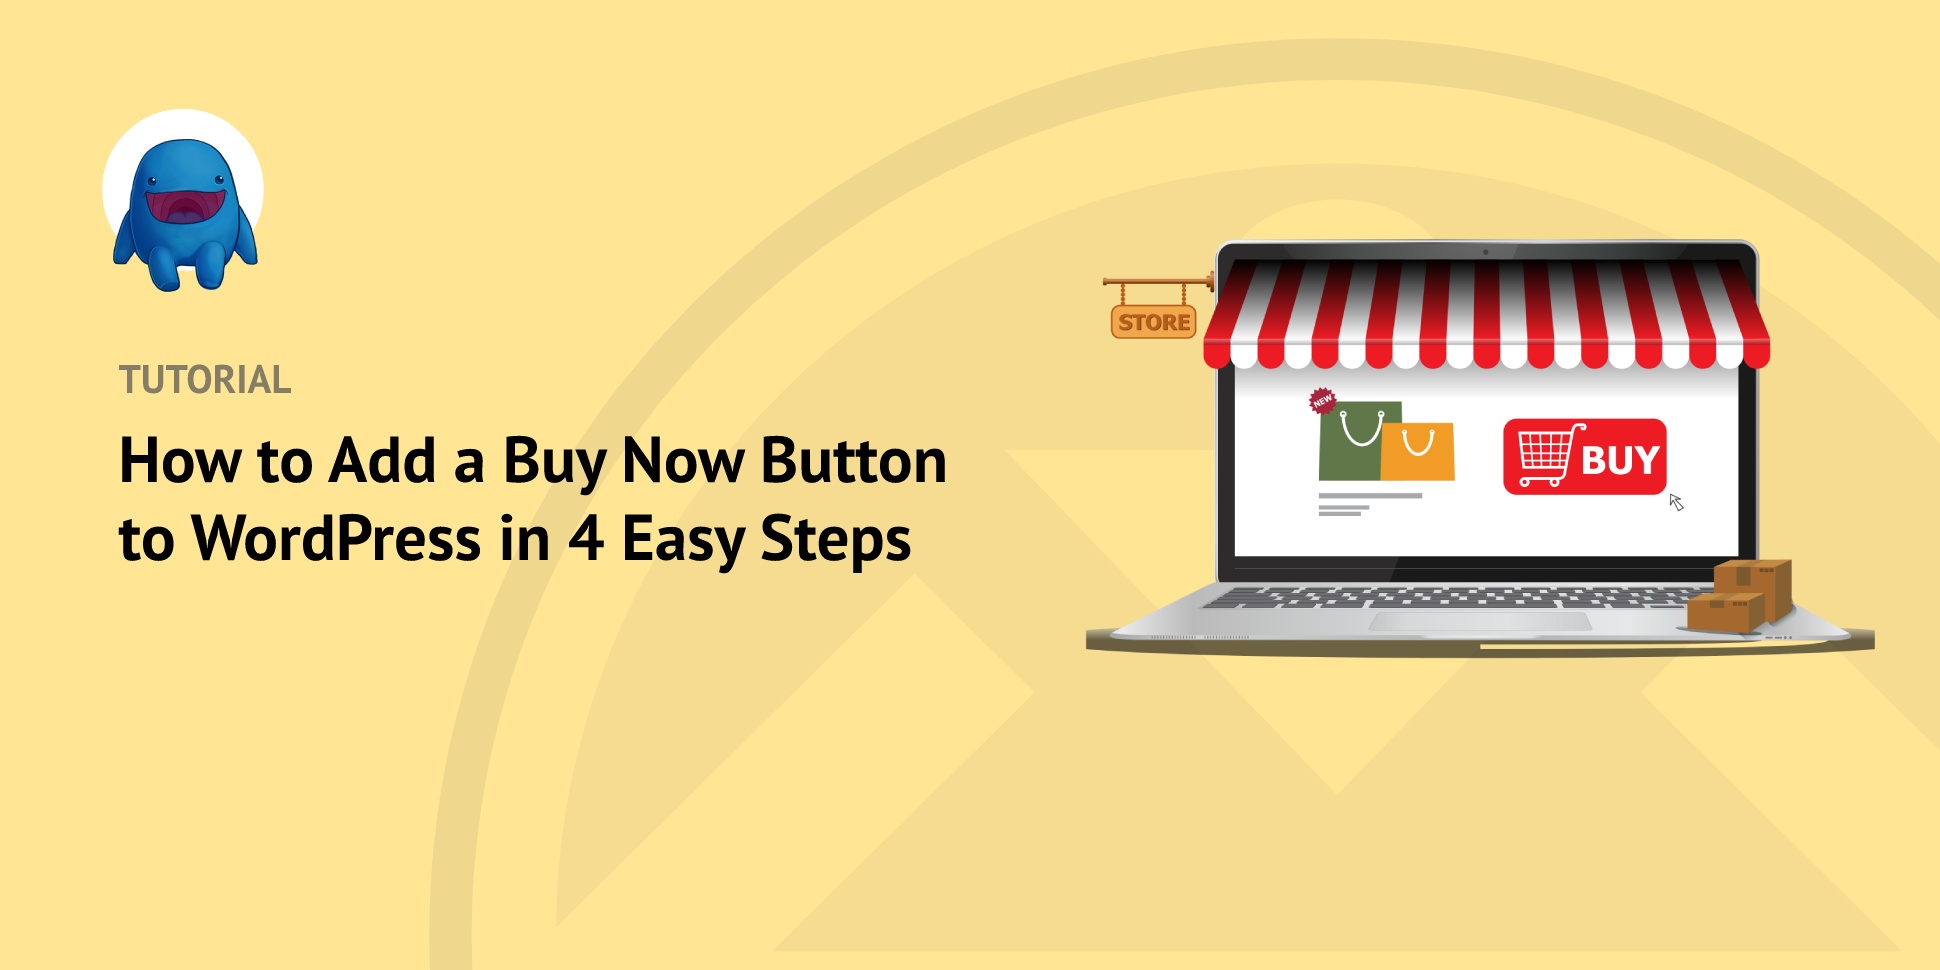 How to Add a Buy Now Button to WordPress